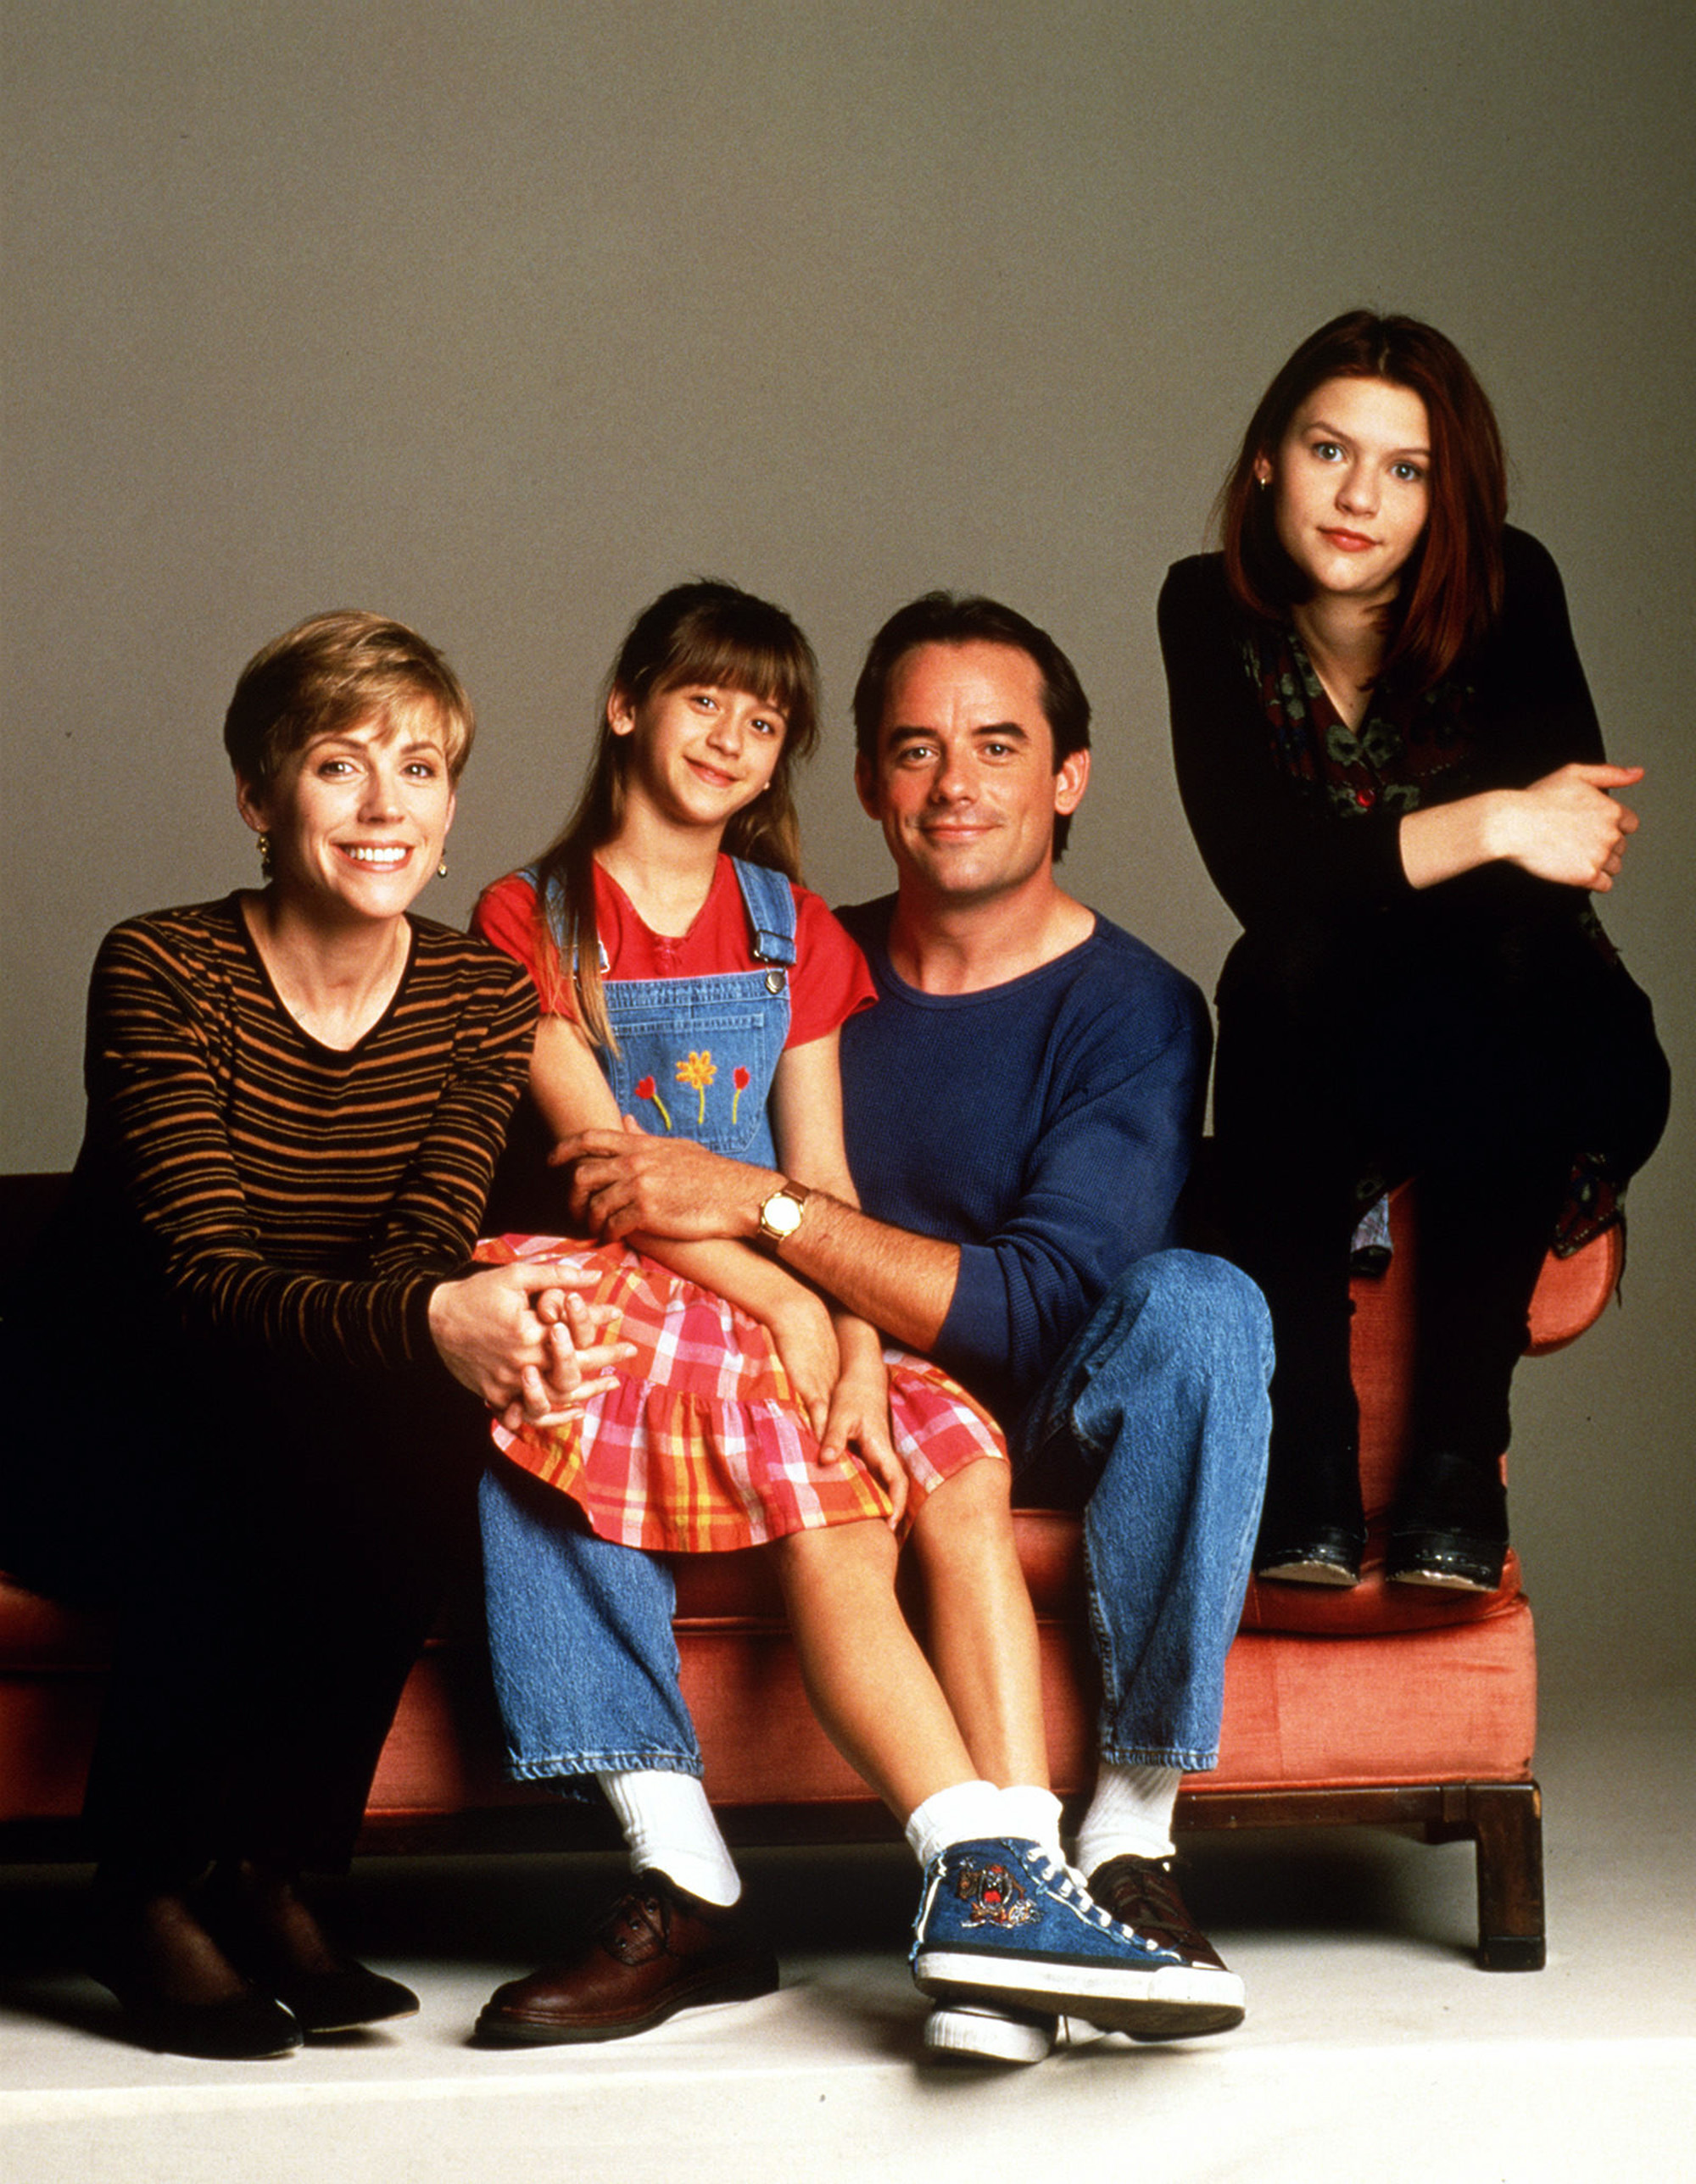 Whatever Happened To The Cast Of 'My So-Called Life' And Are Their Lives Still Divided Into Kissing, And Not Kissing?